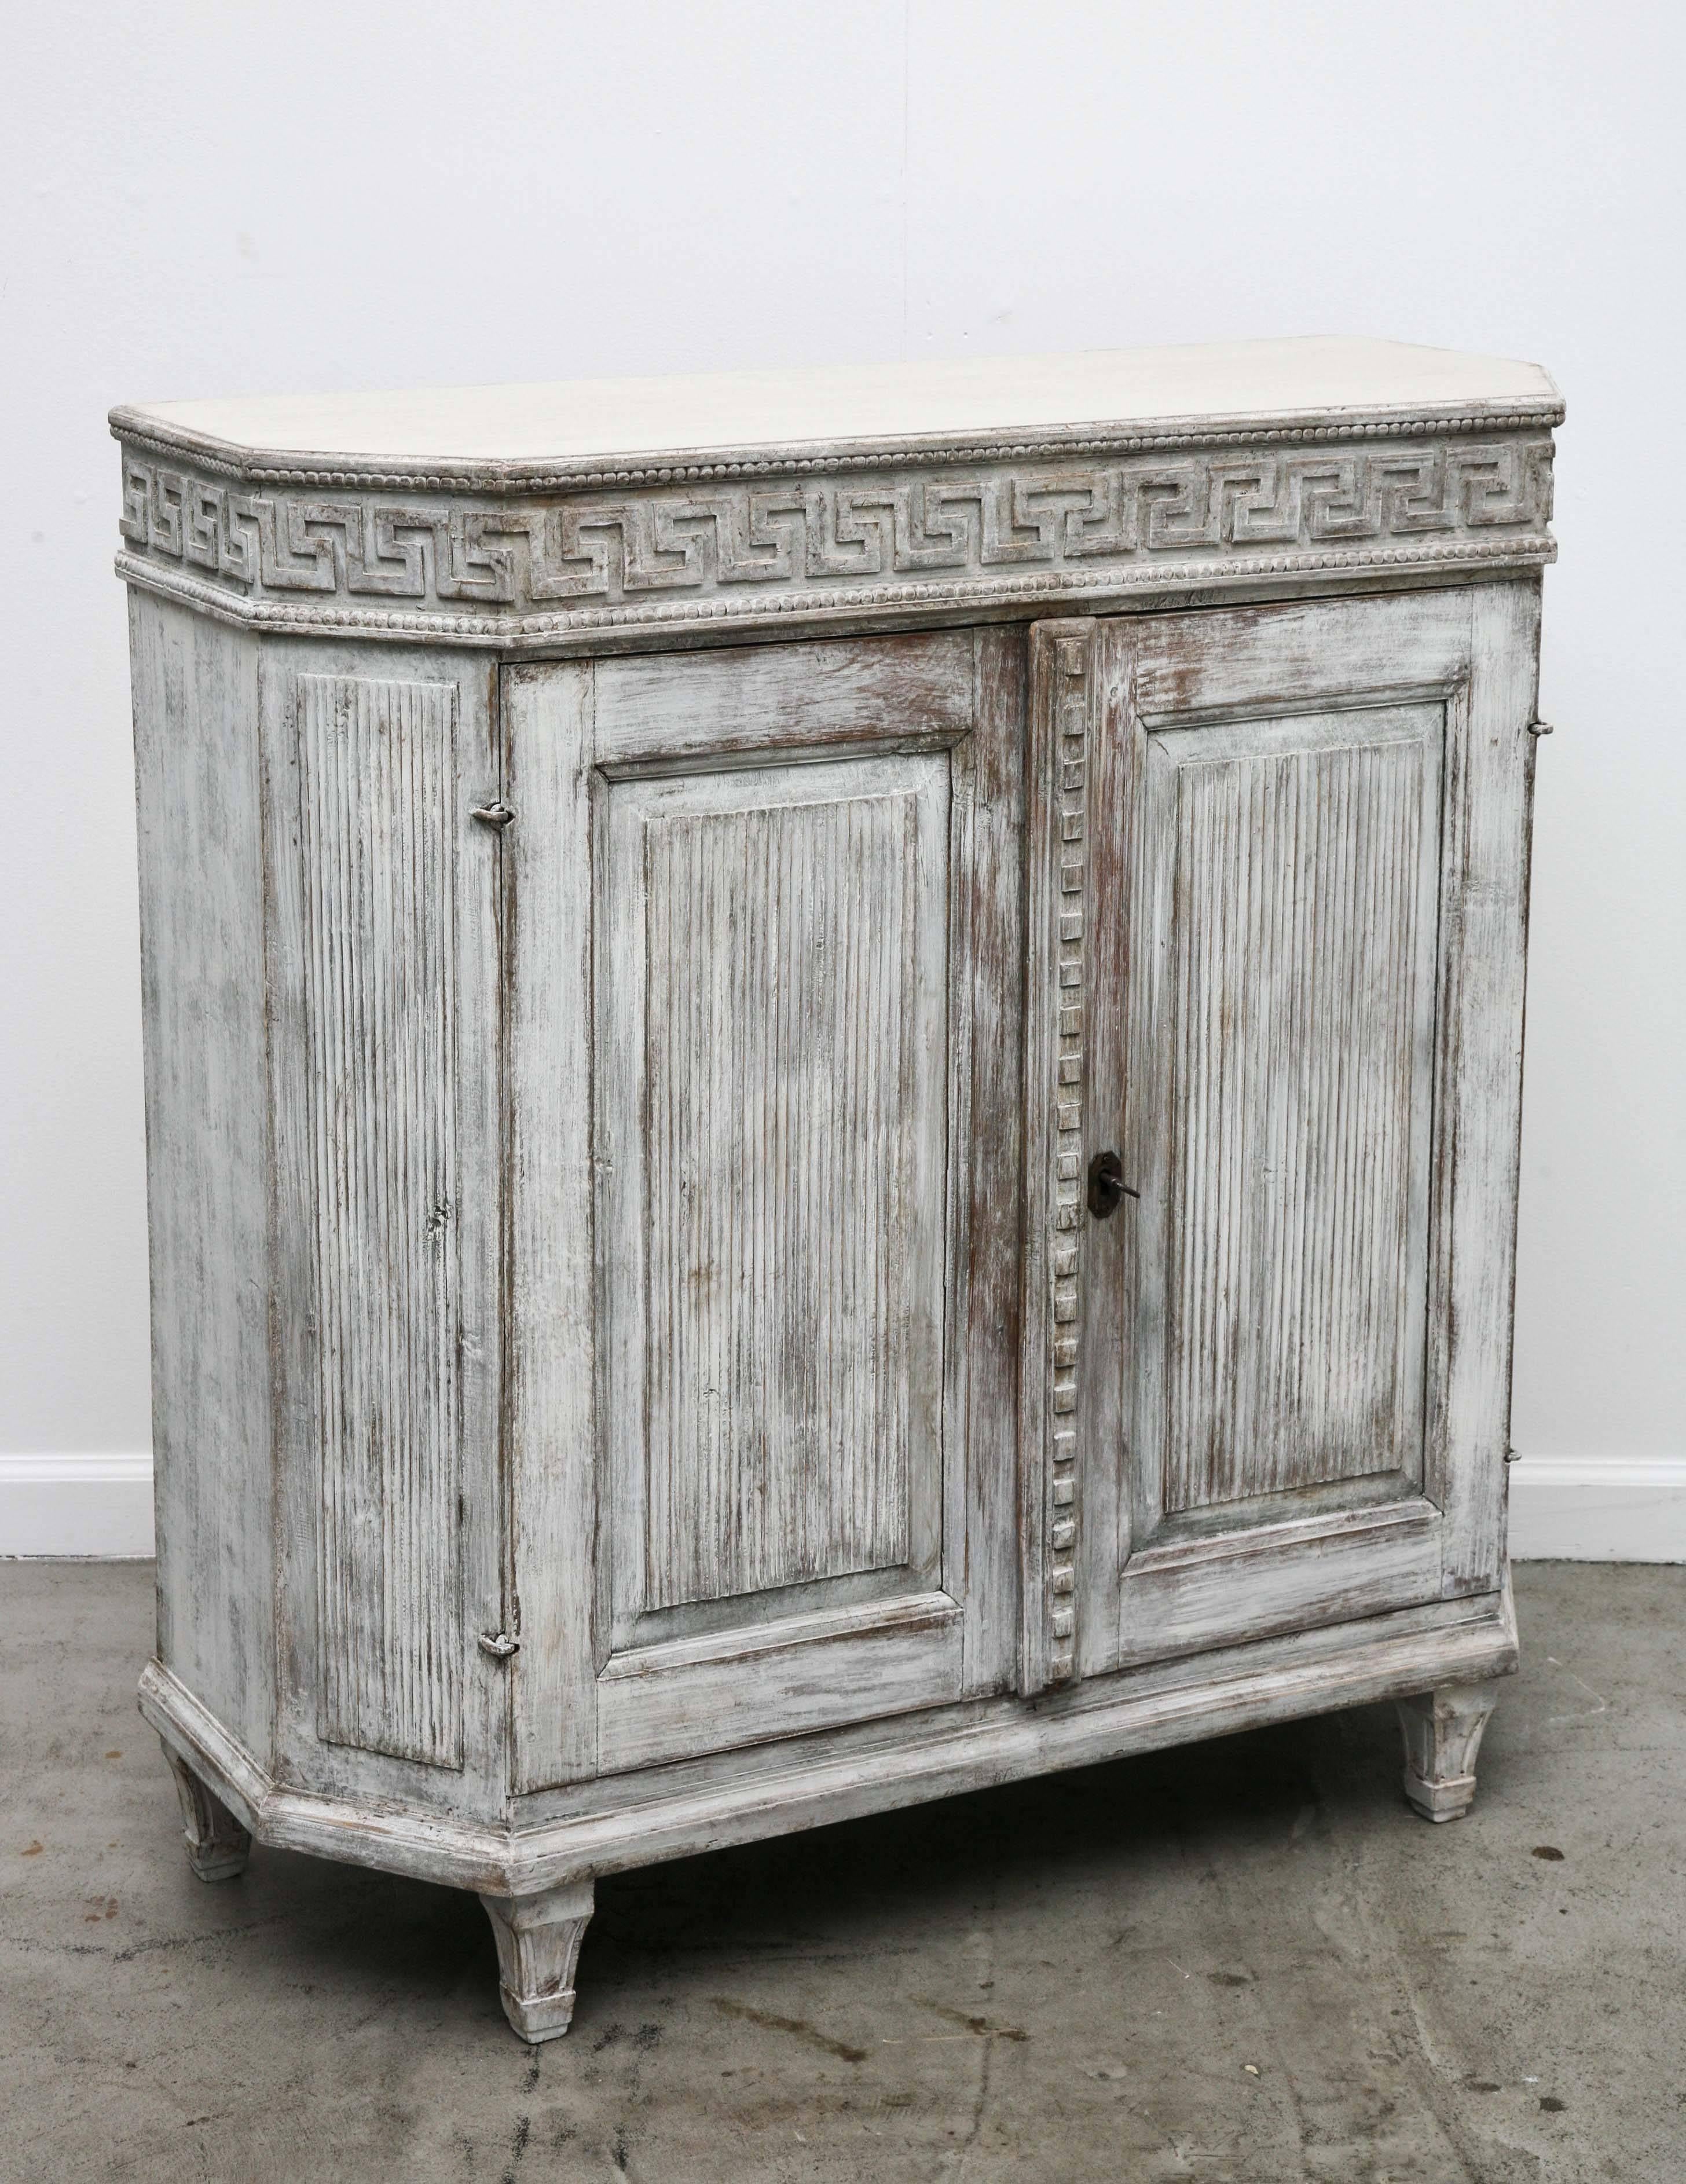 Antique Swedish Gustavian painted small sideboard, carved beaded border and
Greek Key border around top of the cabinet, the door fronts and slanted sides have reeded carved details and a raised moulding with square carving between the doors,